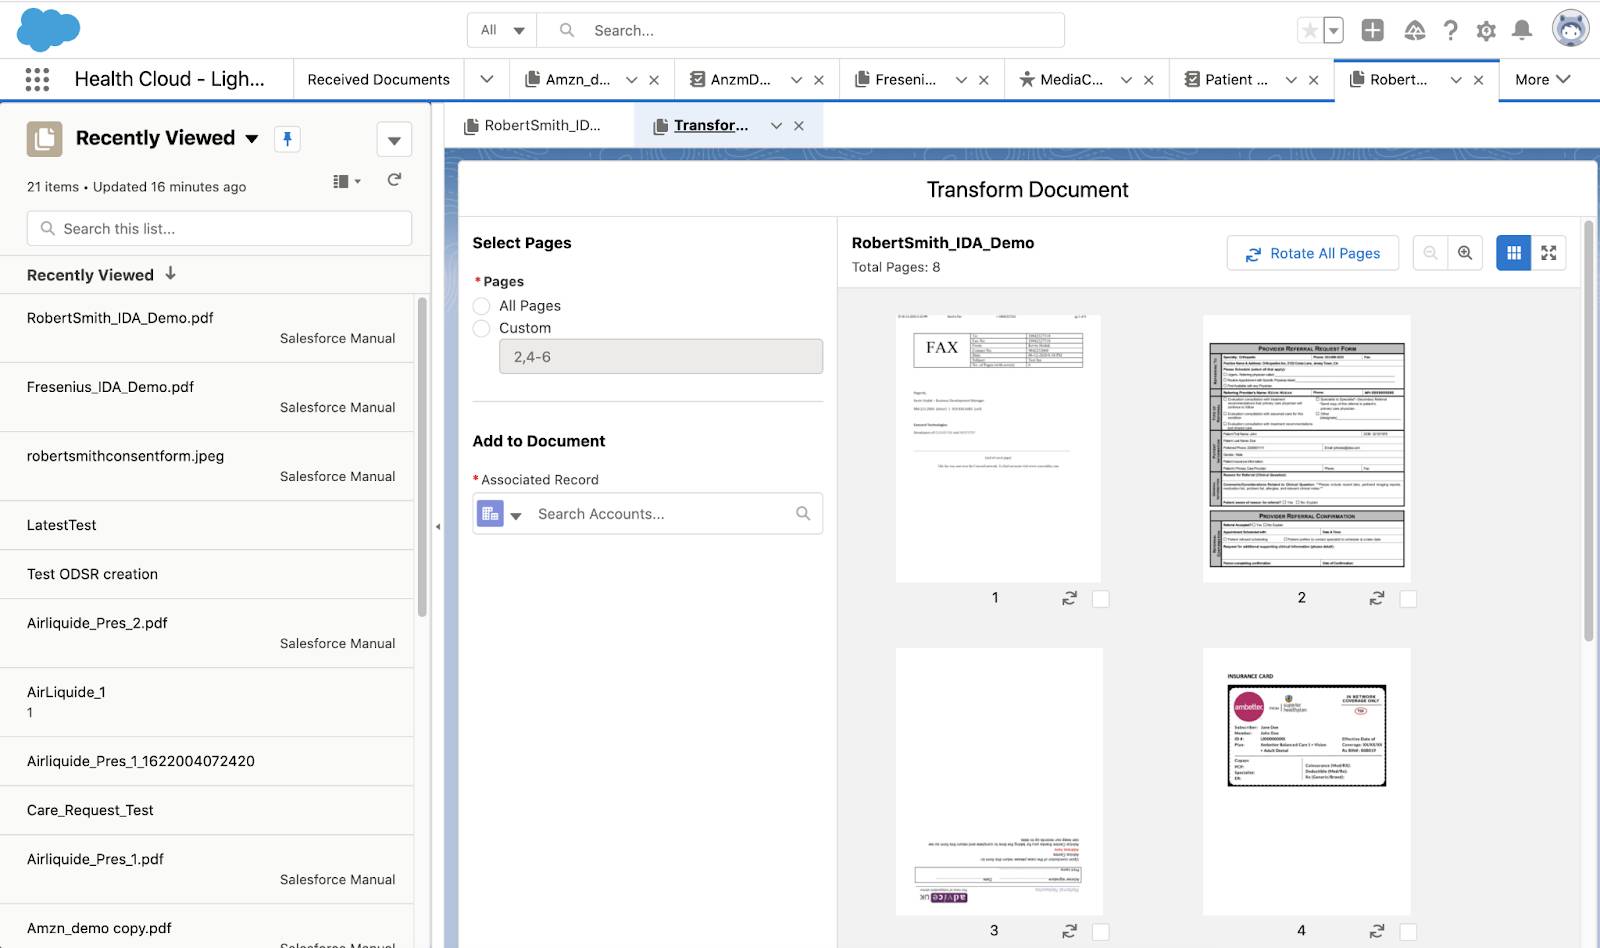 The Transform Document window which allows users to rotate and attach individual pages to different objects.